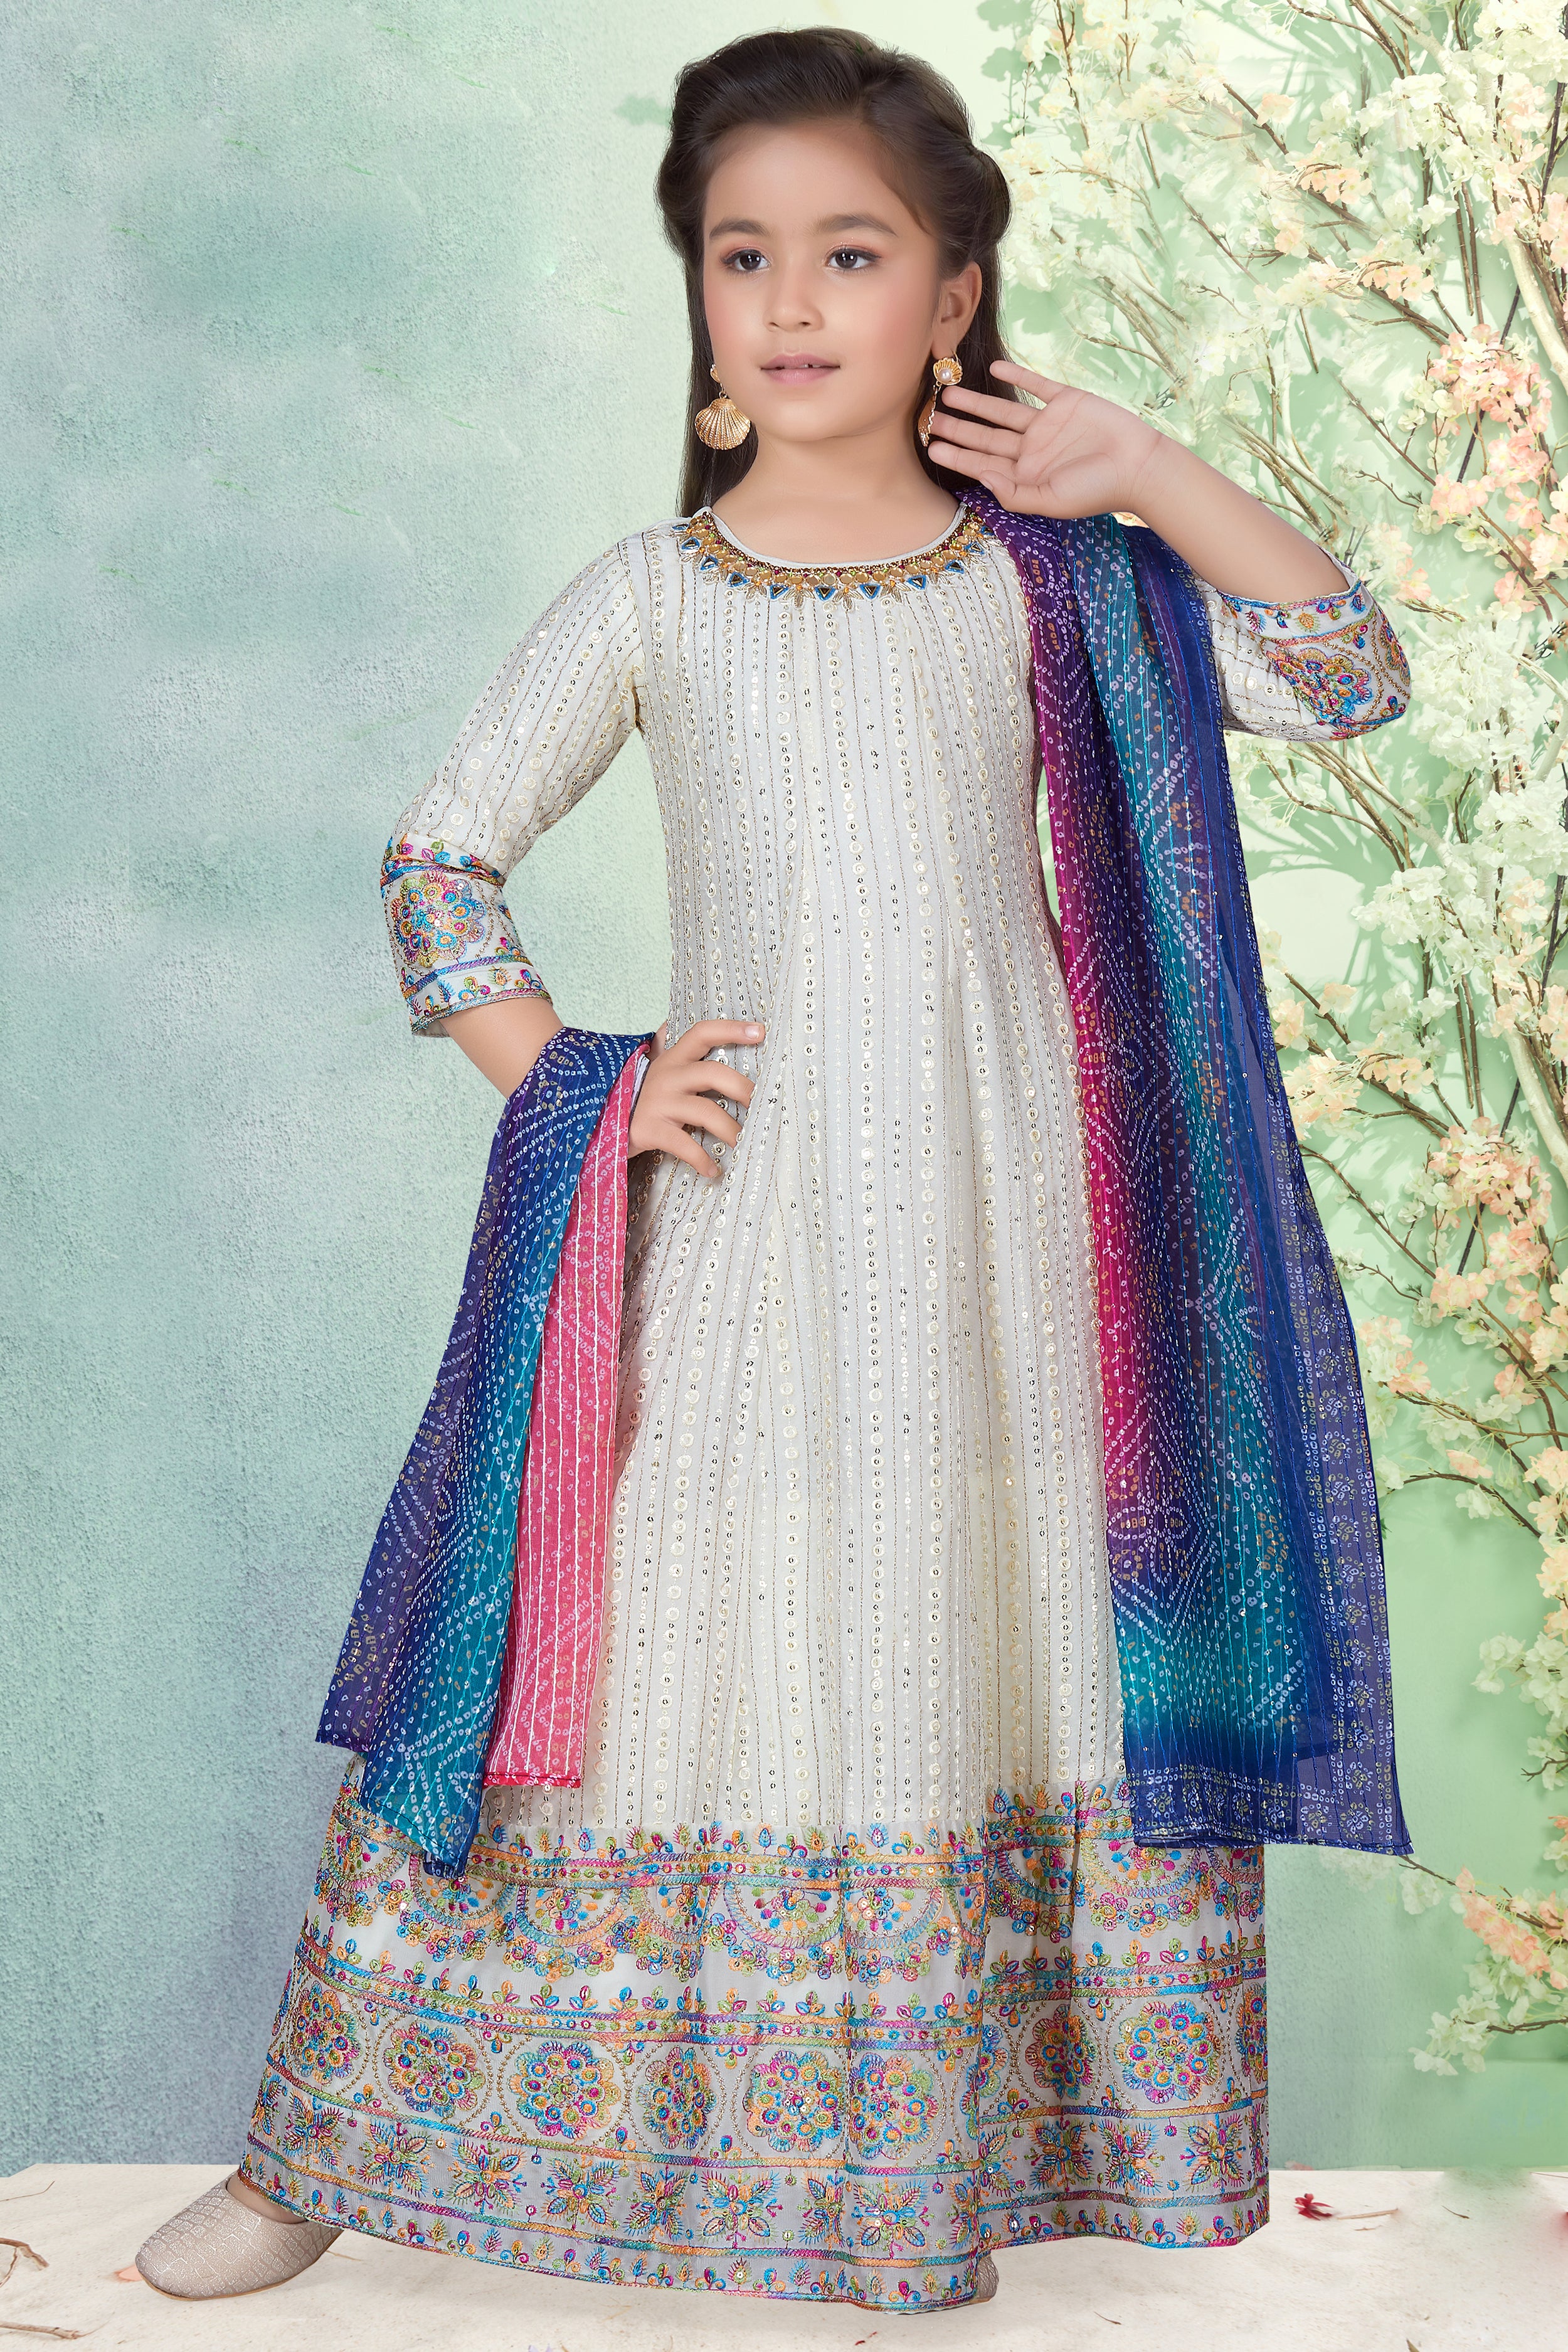 Buy Eid Dresses & Eid Outfits Online - Indian Dresses for Eid